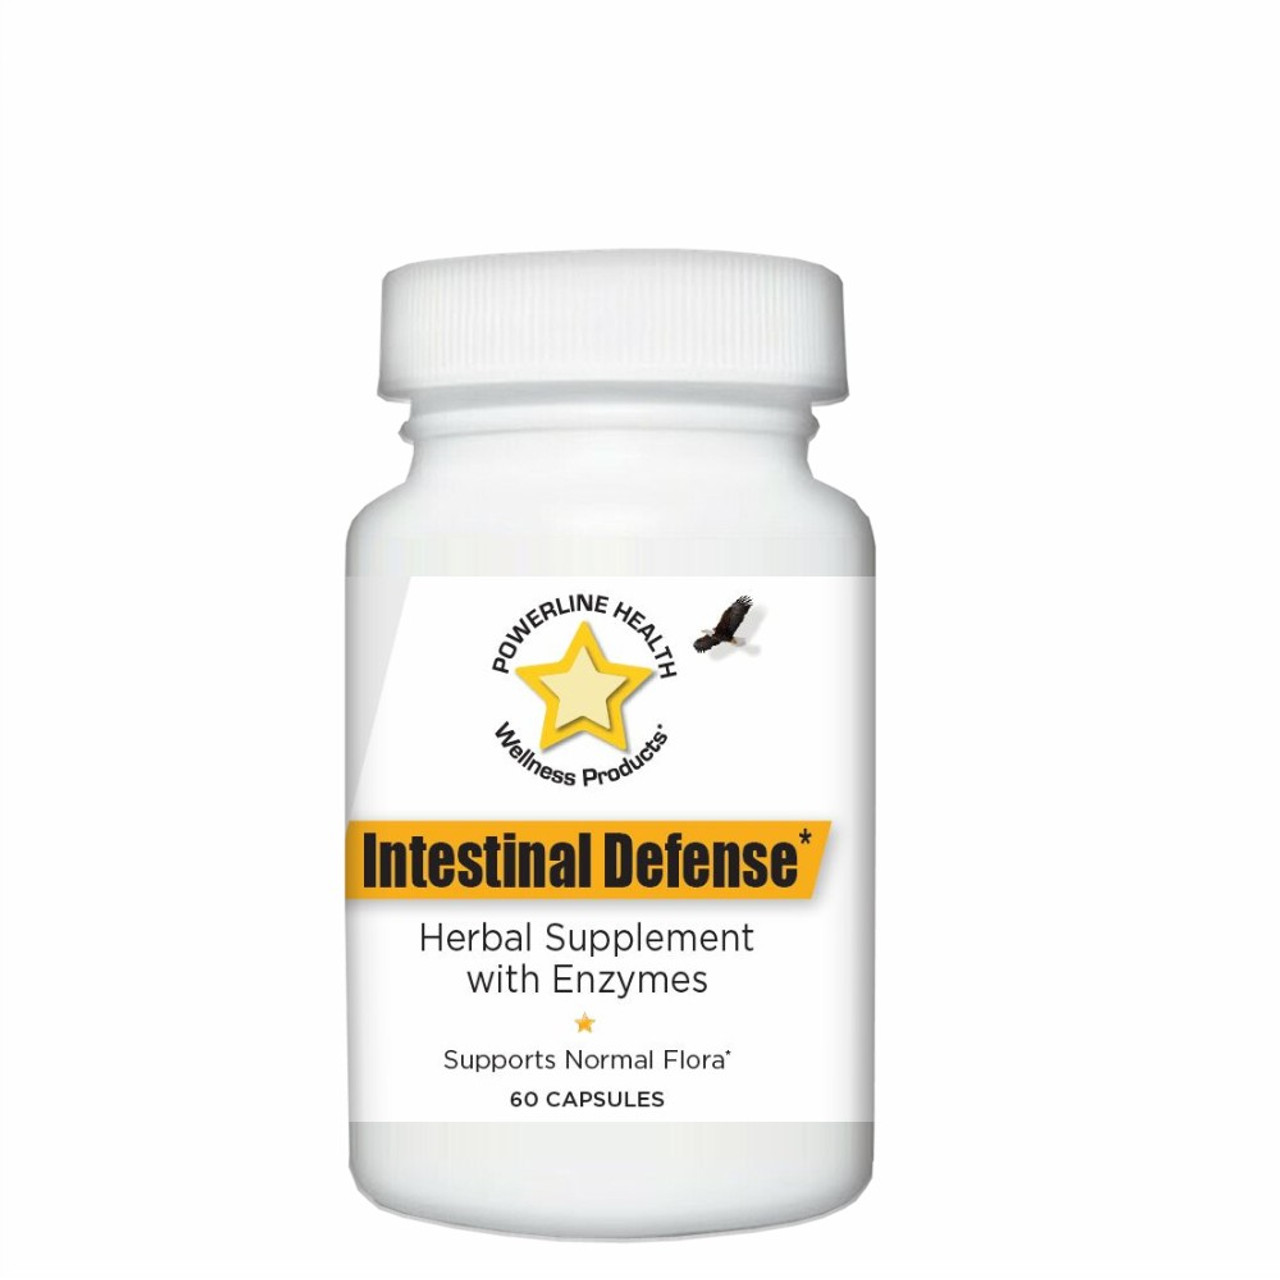 Intestinal Defense - Herbal Supplement with Enzymes